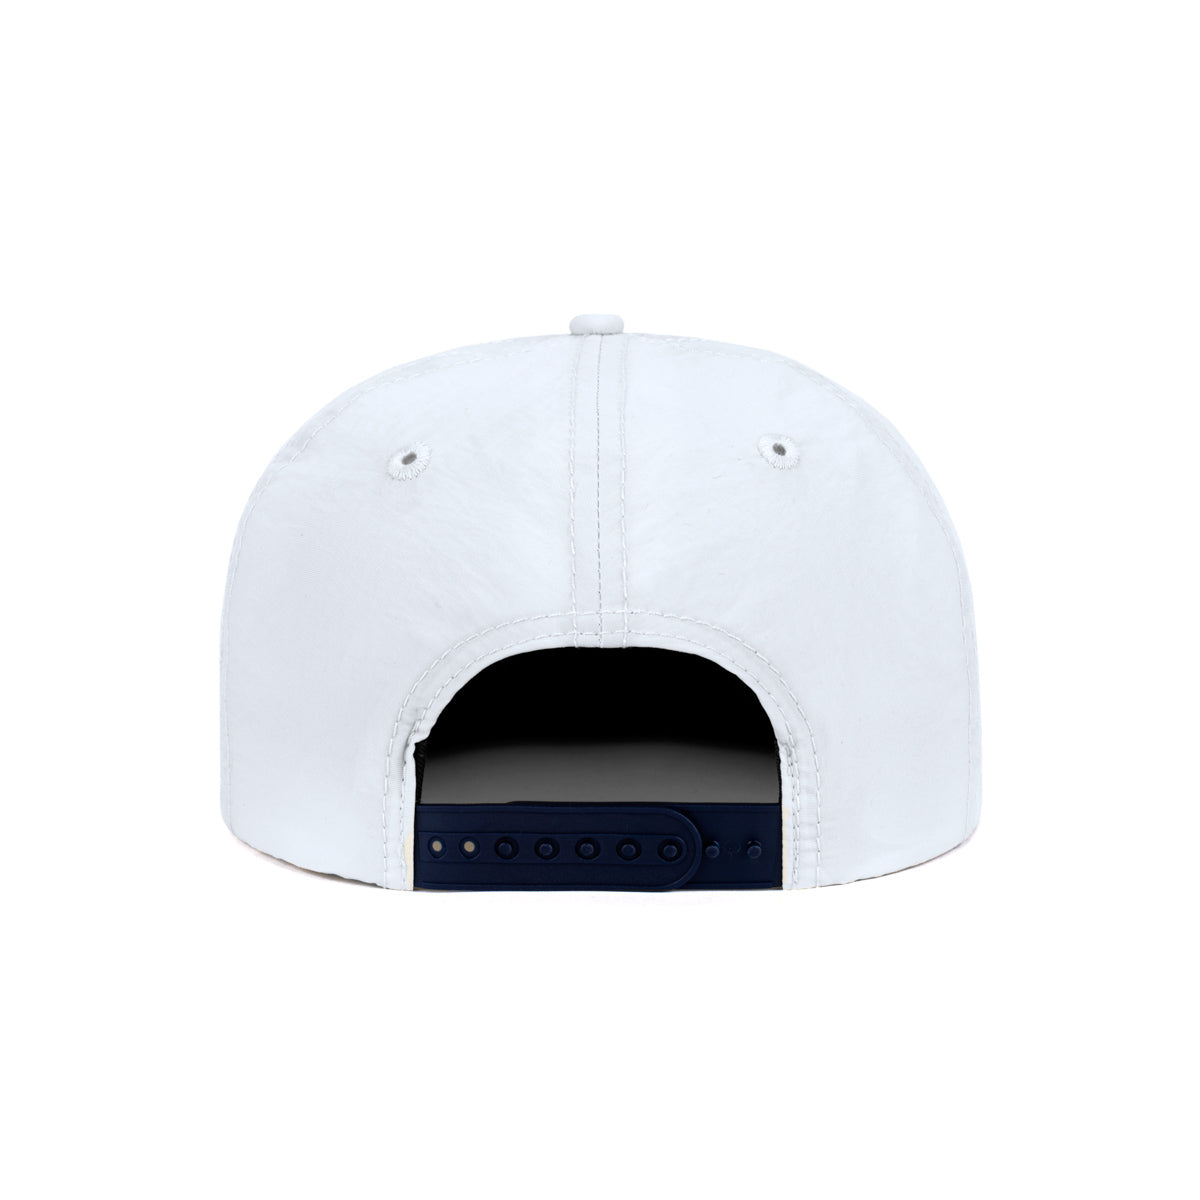 Barstool Golf Crossed Tees Retro Snapback-Hats-Fore Play-White-One Size-Barstool Sports